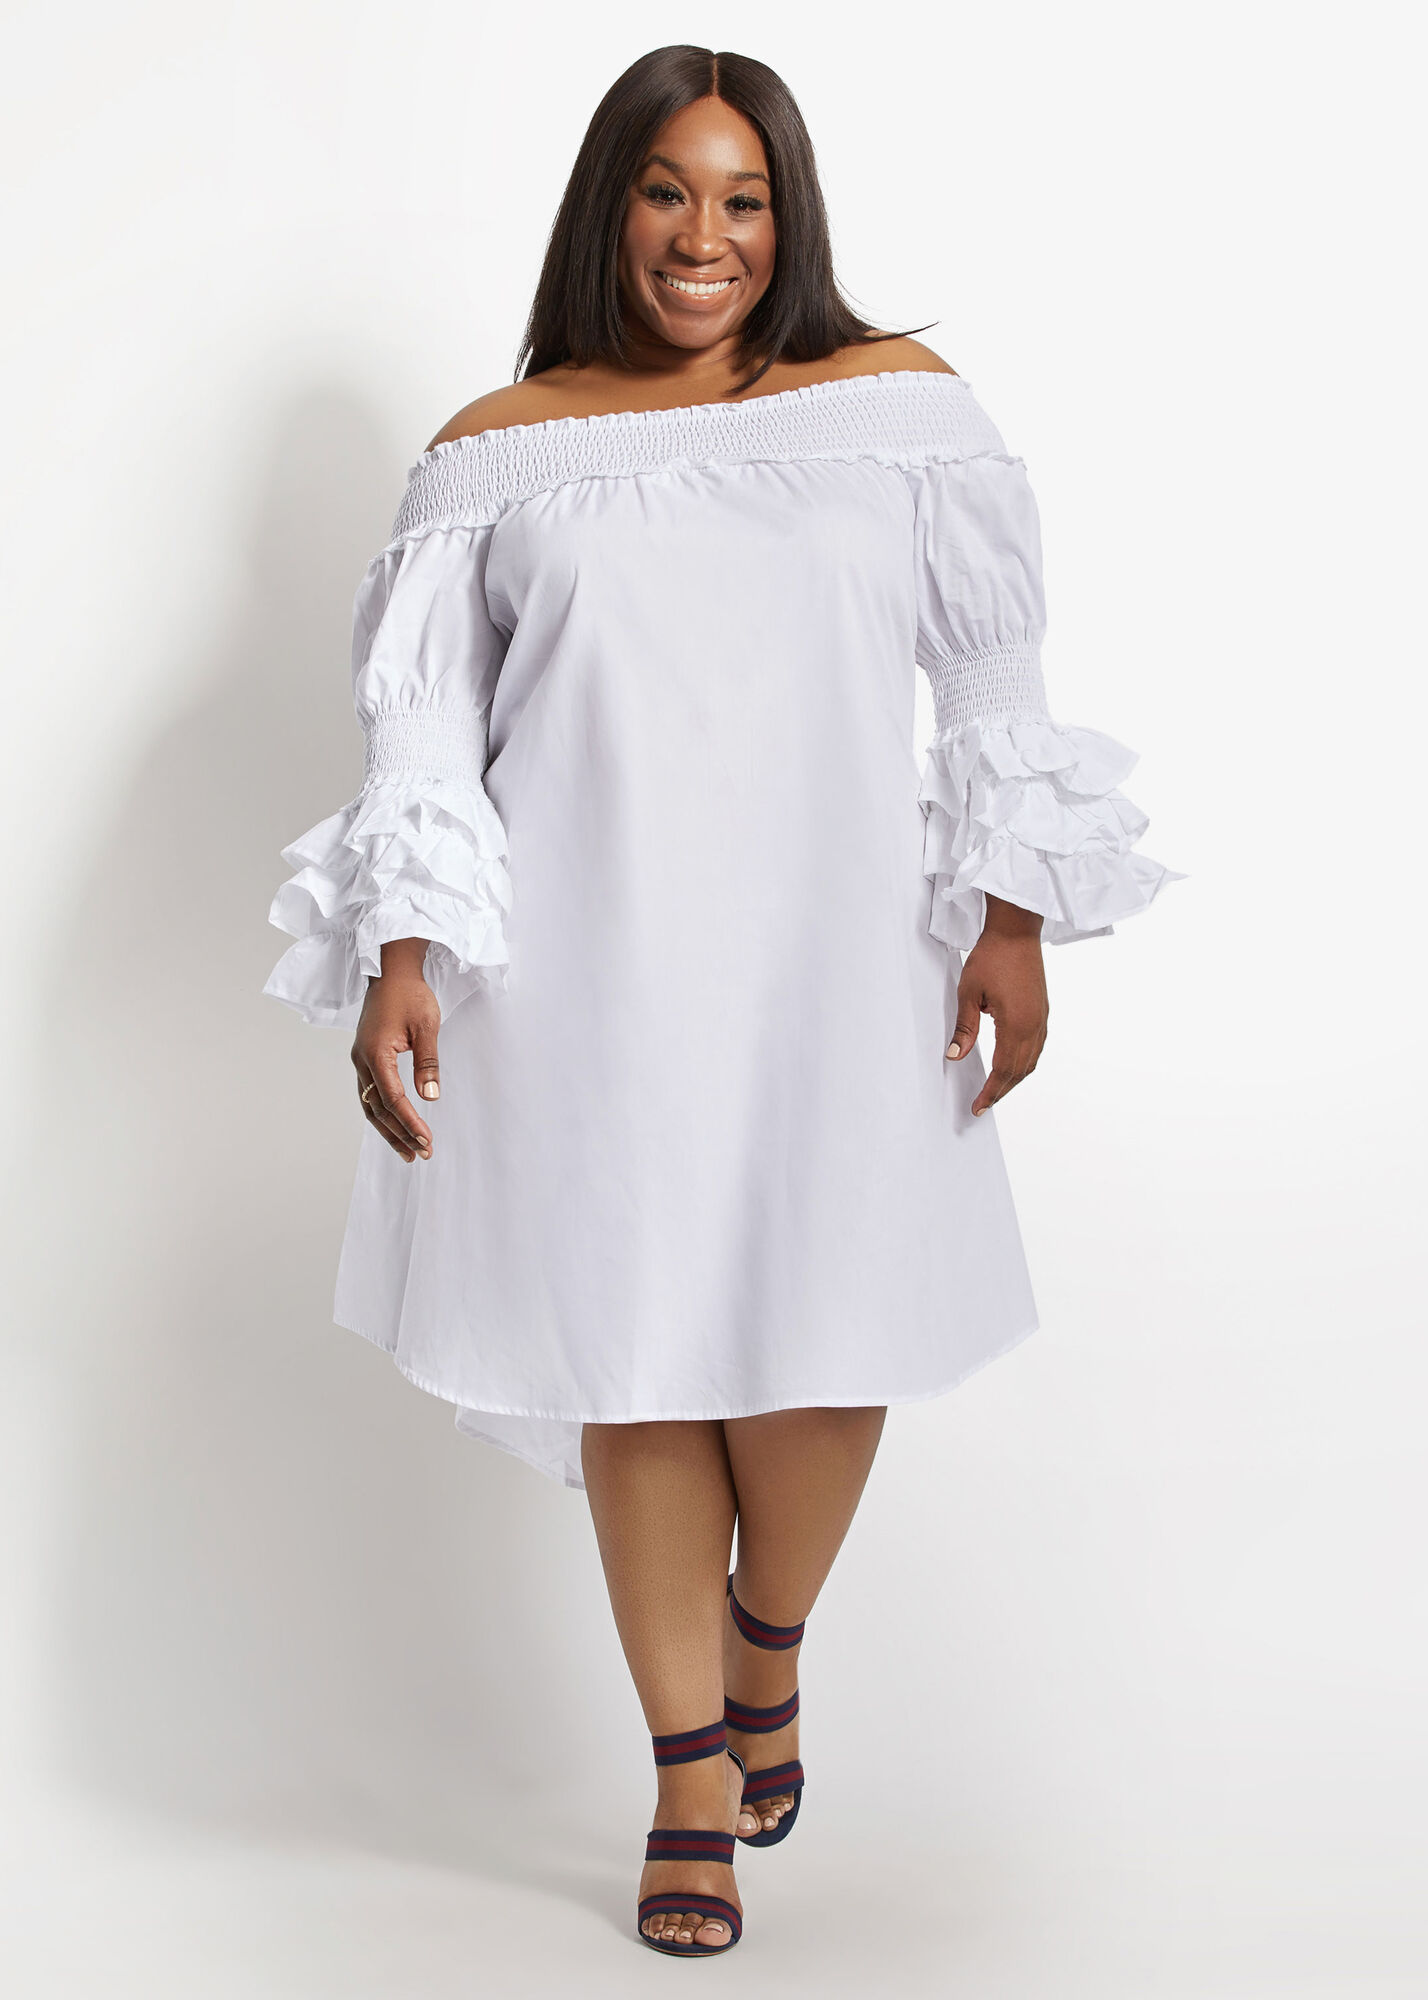 Plus Size Cotton The Shoulder Smocked Tiered Summer Dresses